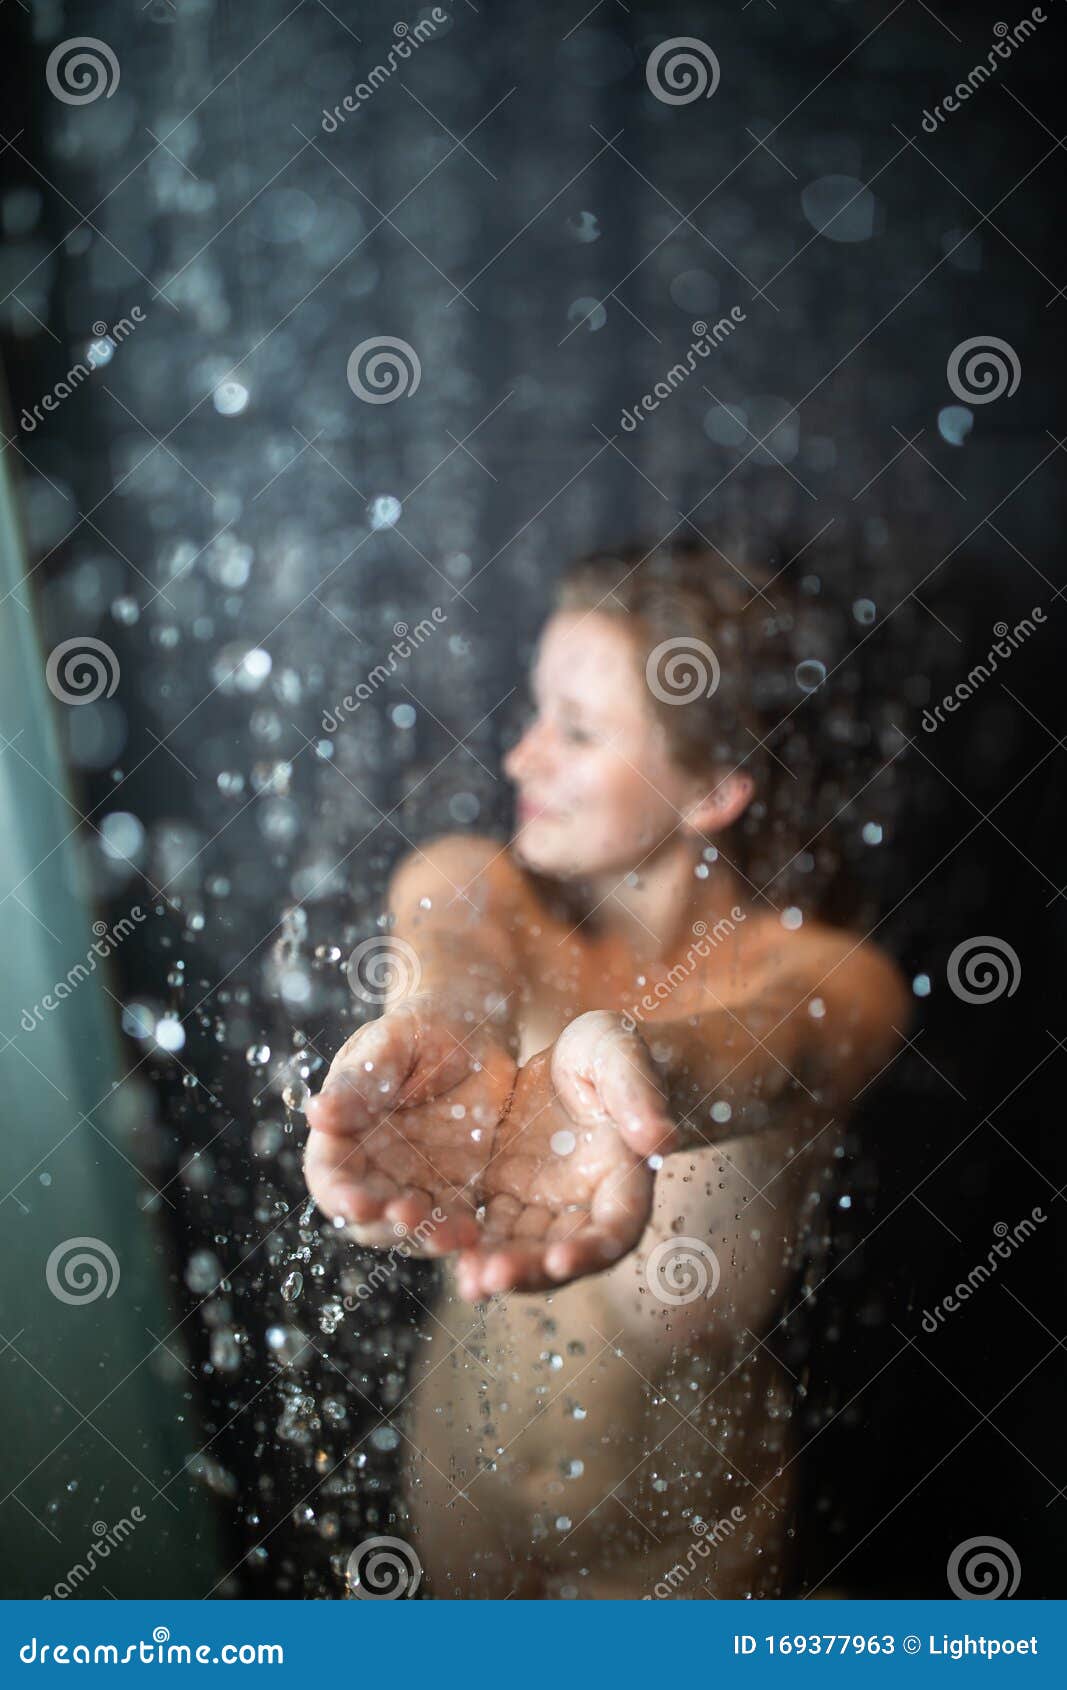 Hot Women Taking Shower their pussies